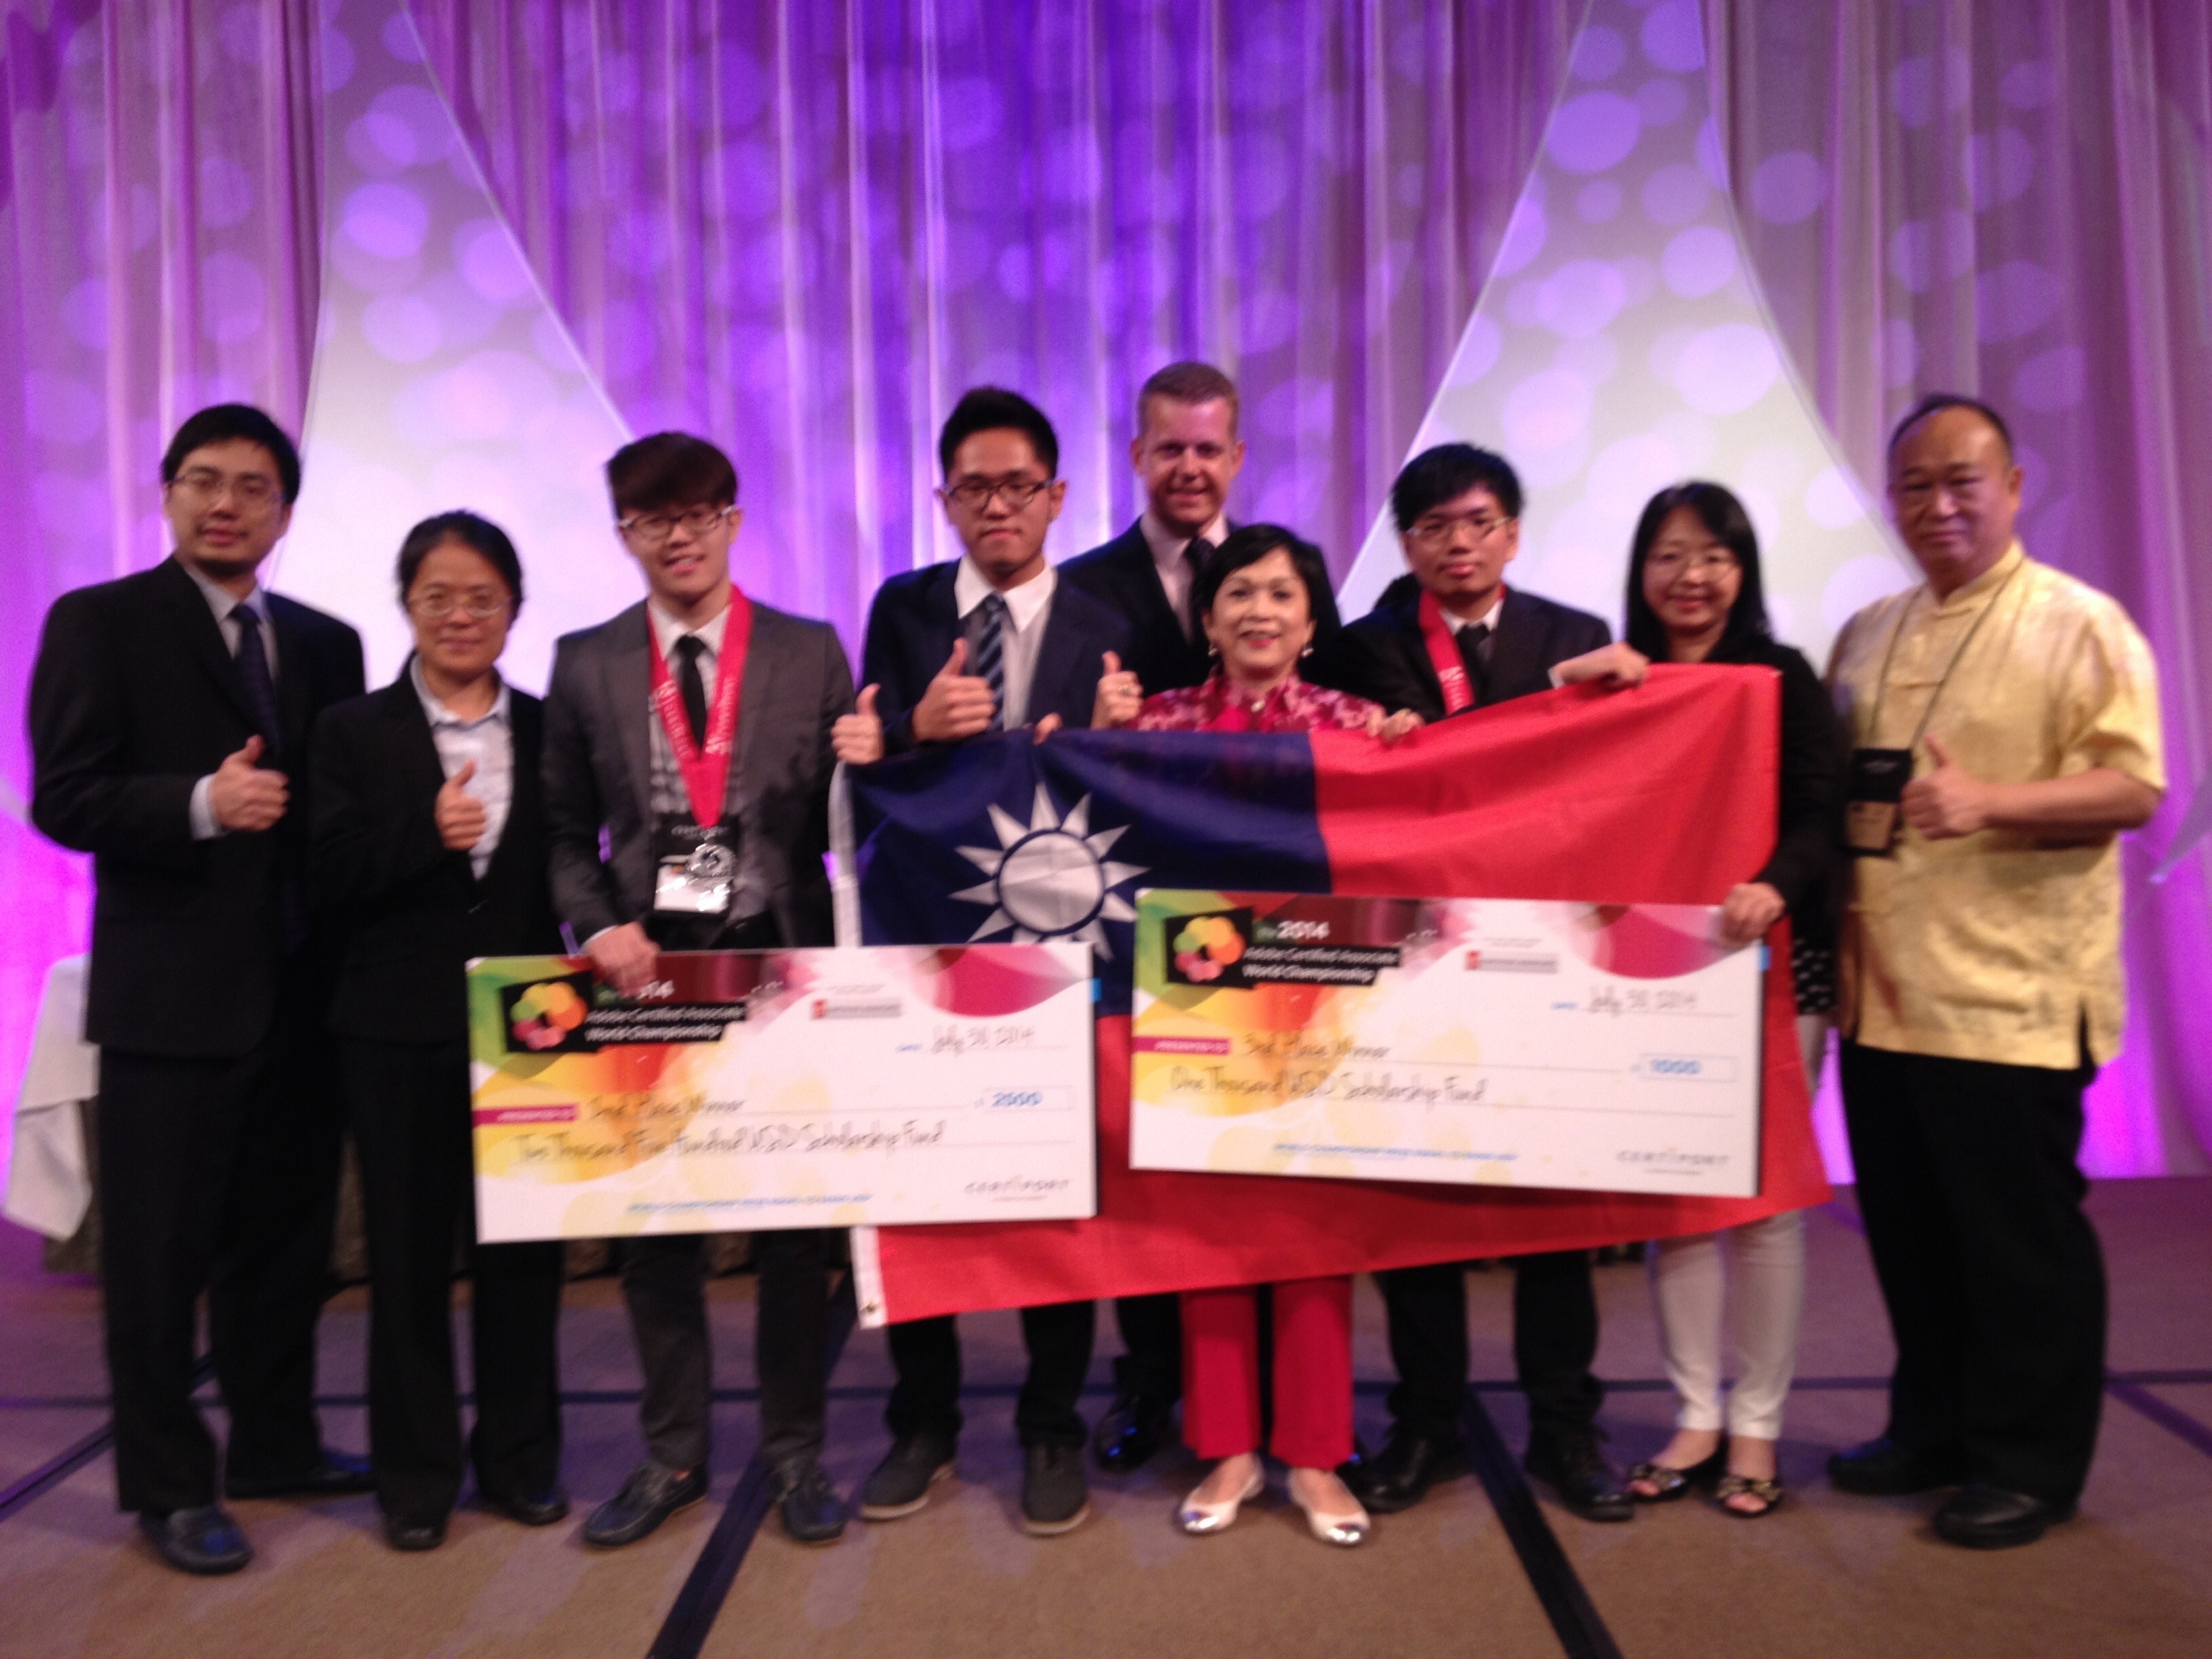 Taiwan Students win 2 silver medals in ACA and MOS’s World Championships